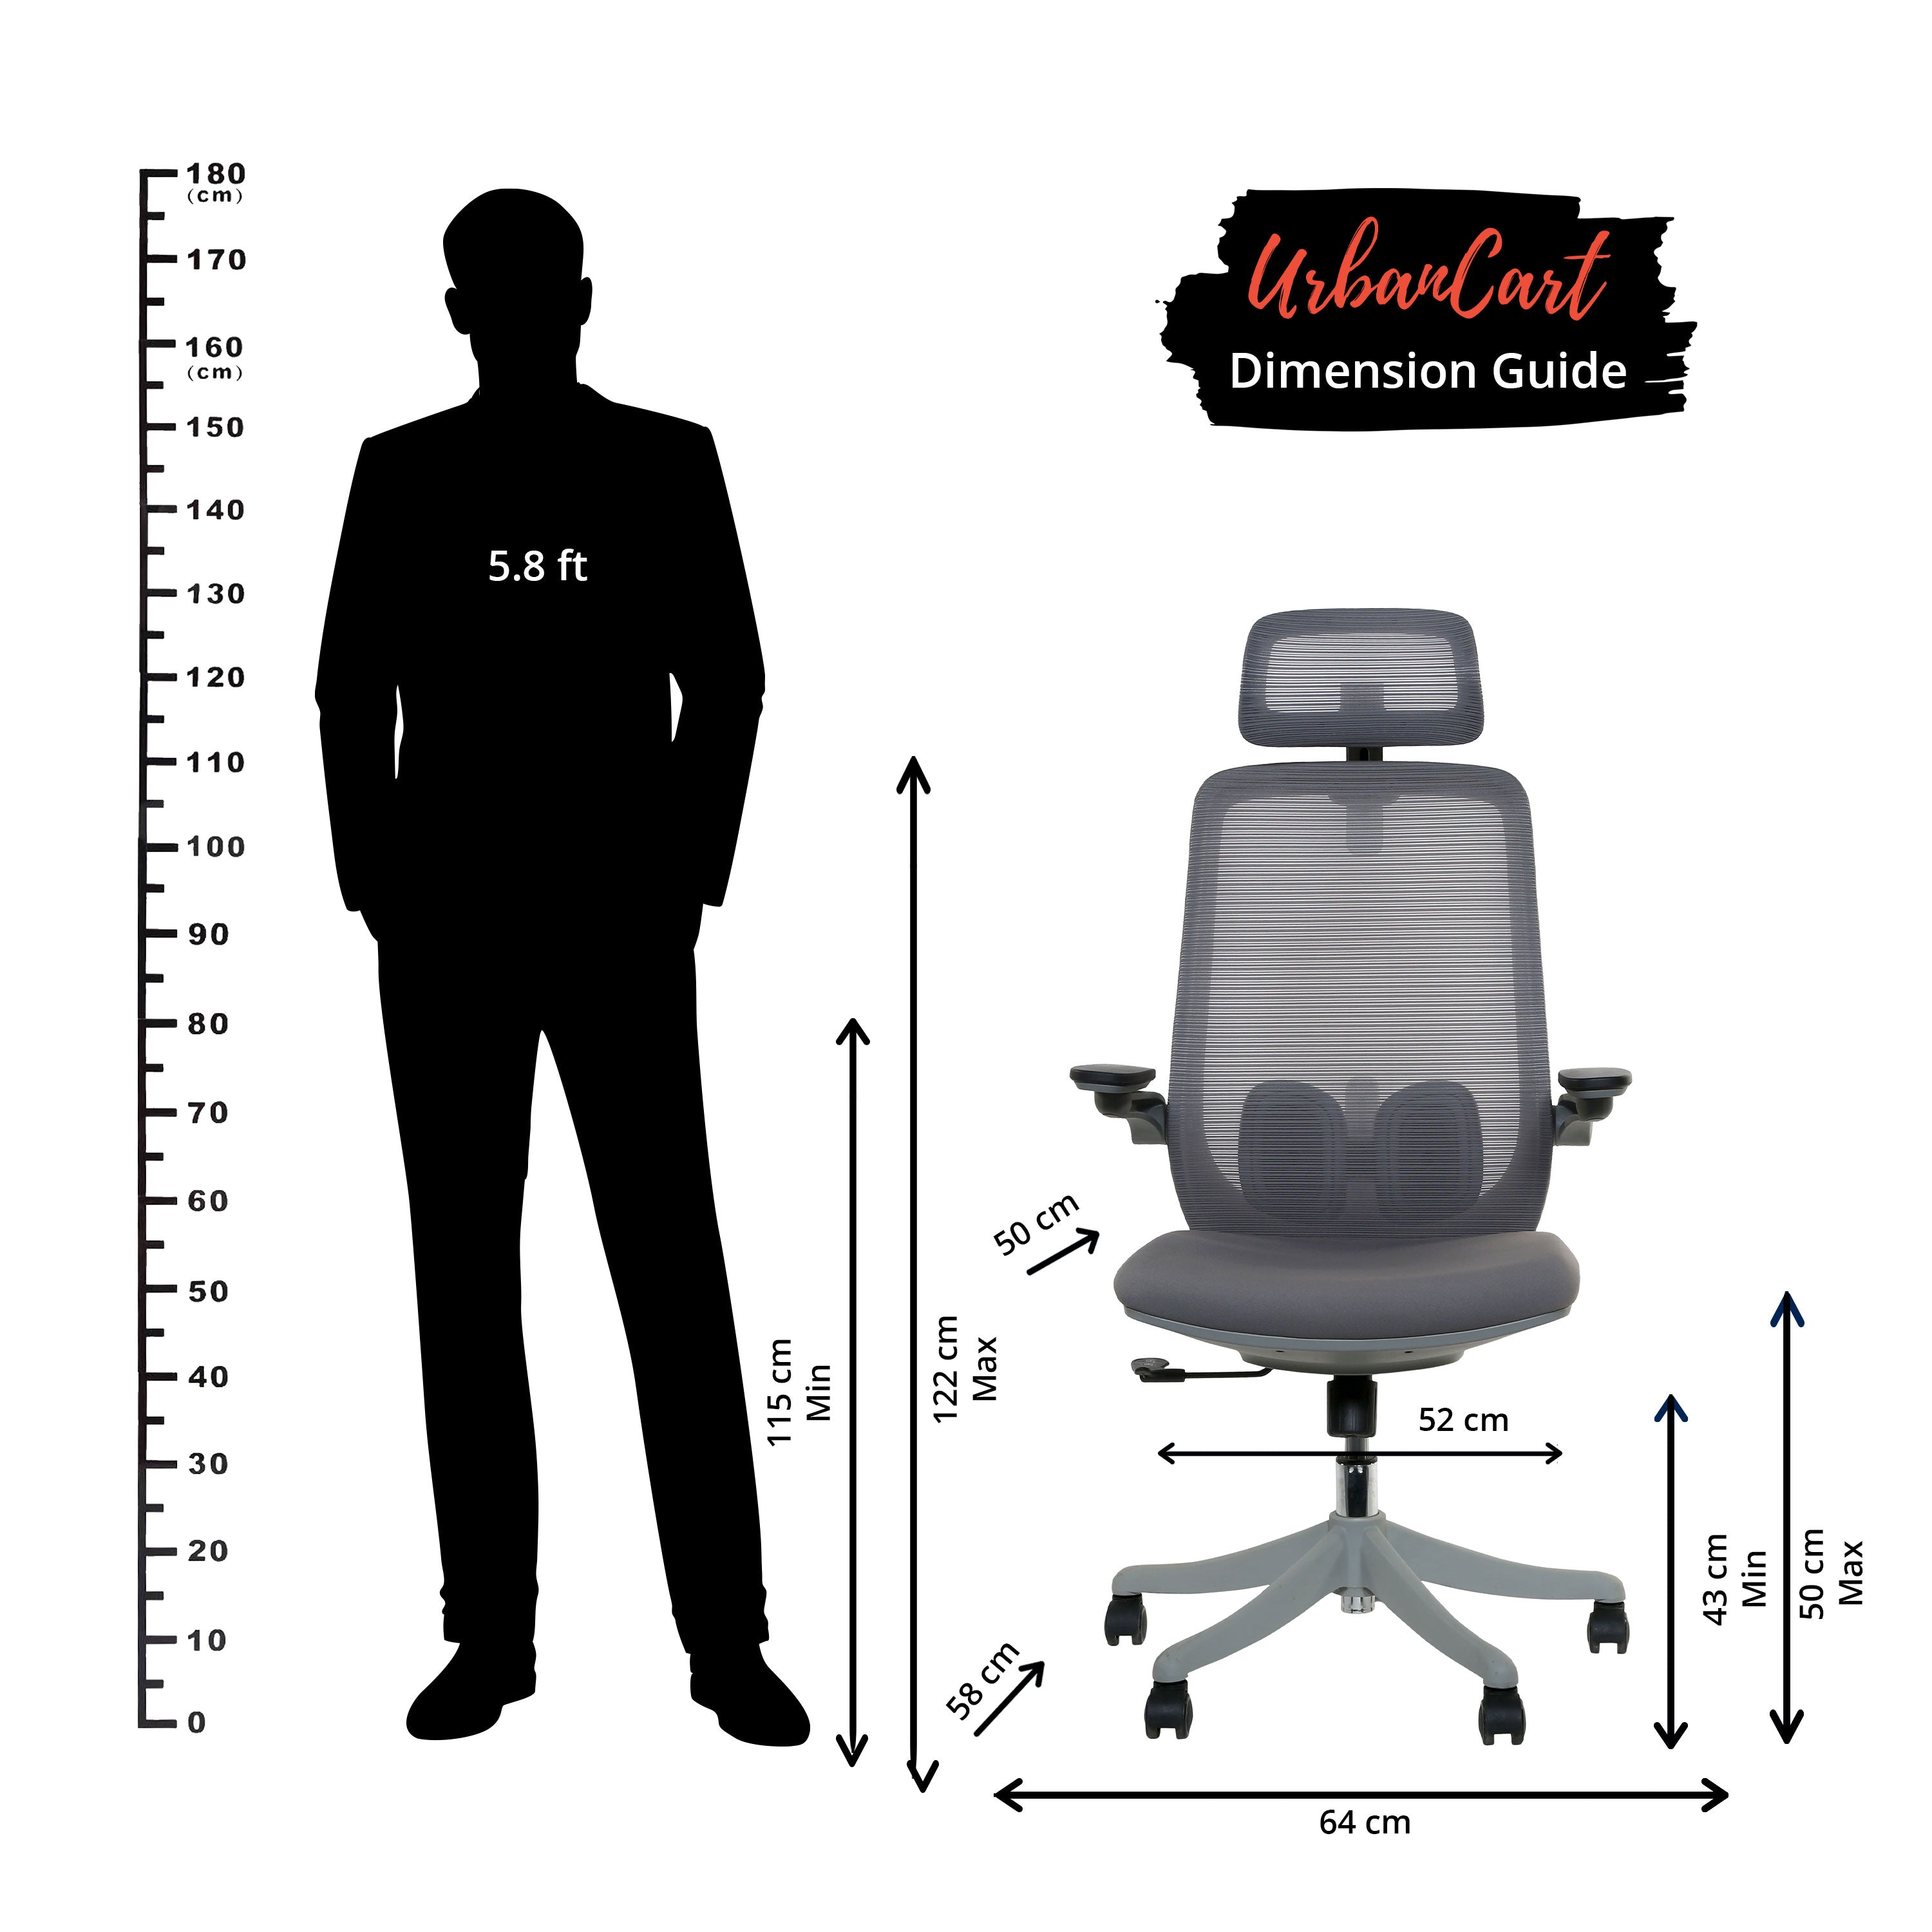 Madison High Back 2D Executive Chair with Nylon Base  - Grey